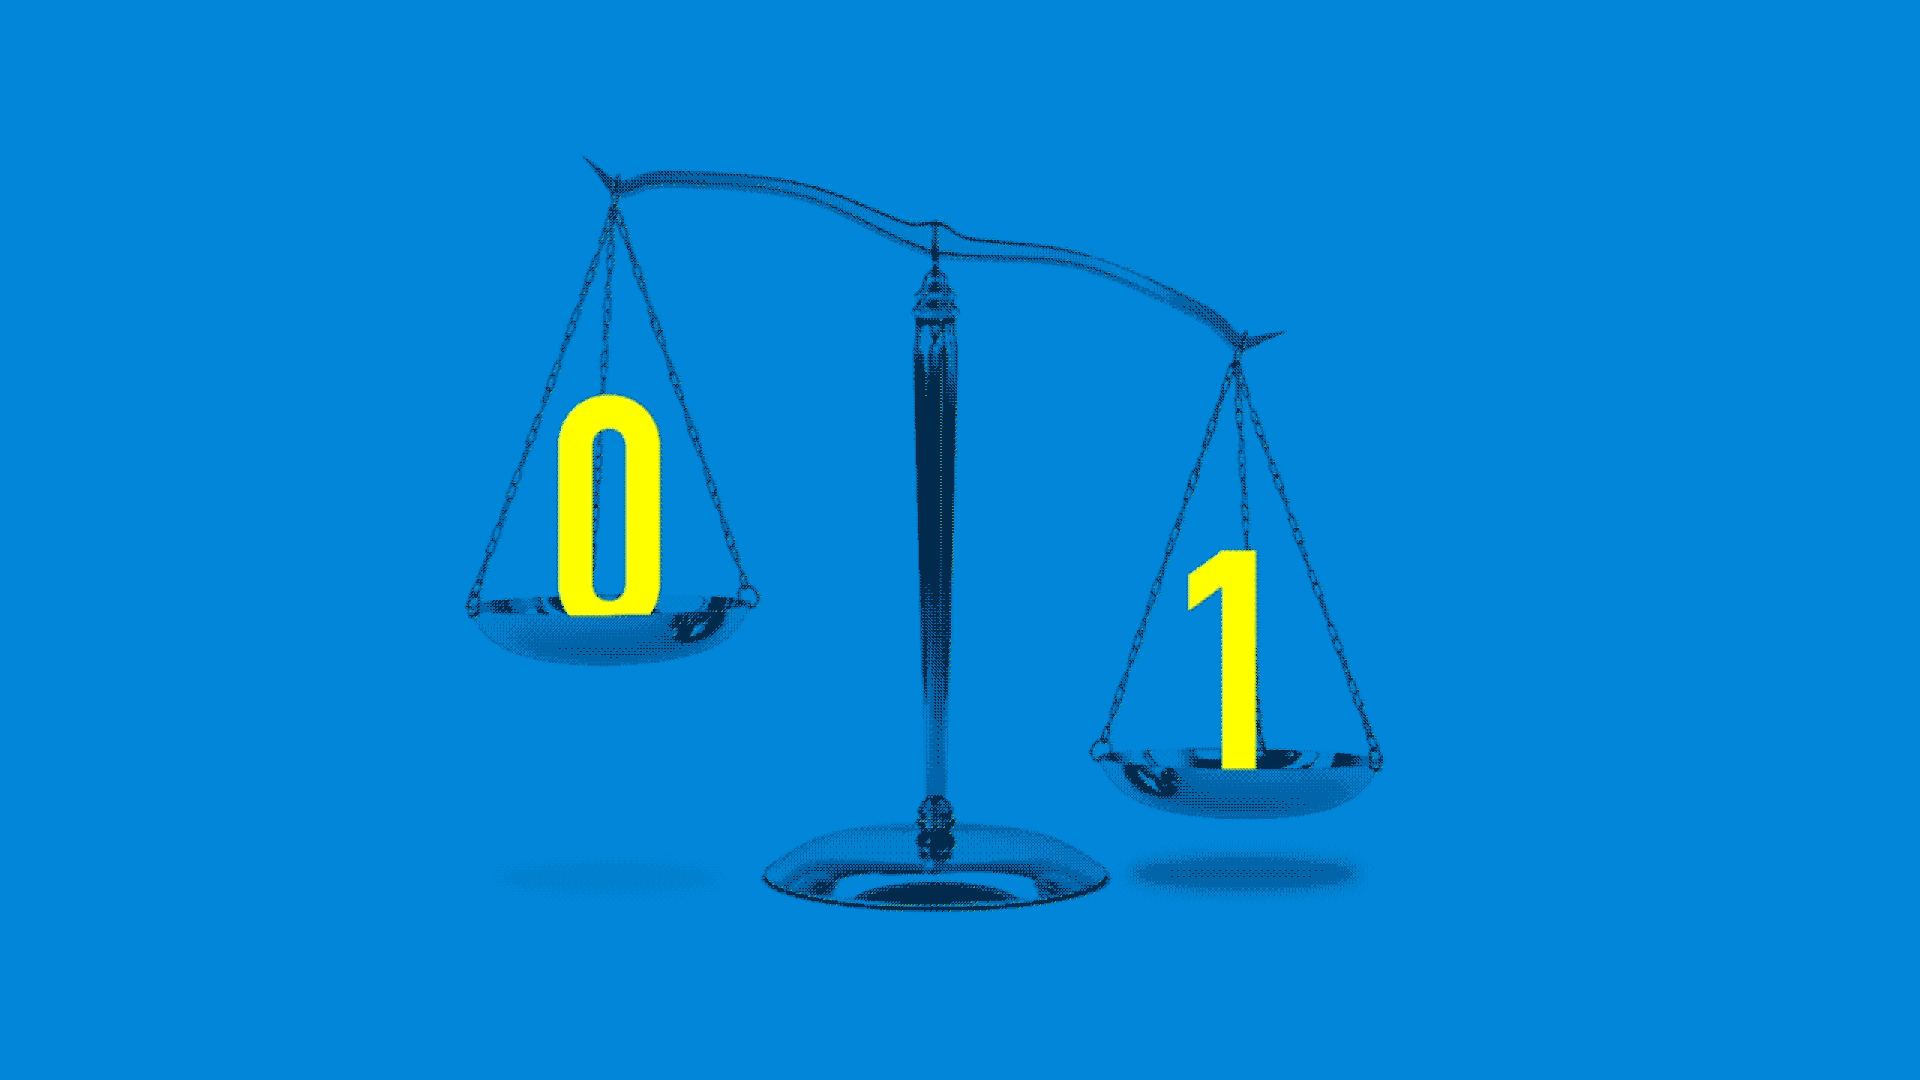 An illustration of the scales of justice balancing a 1 and a 0.